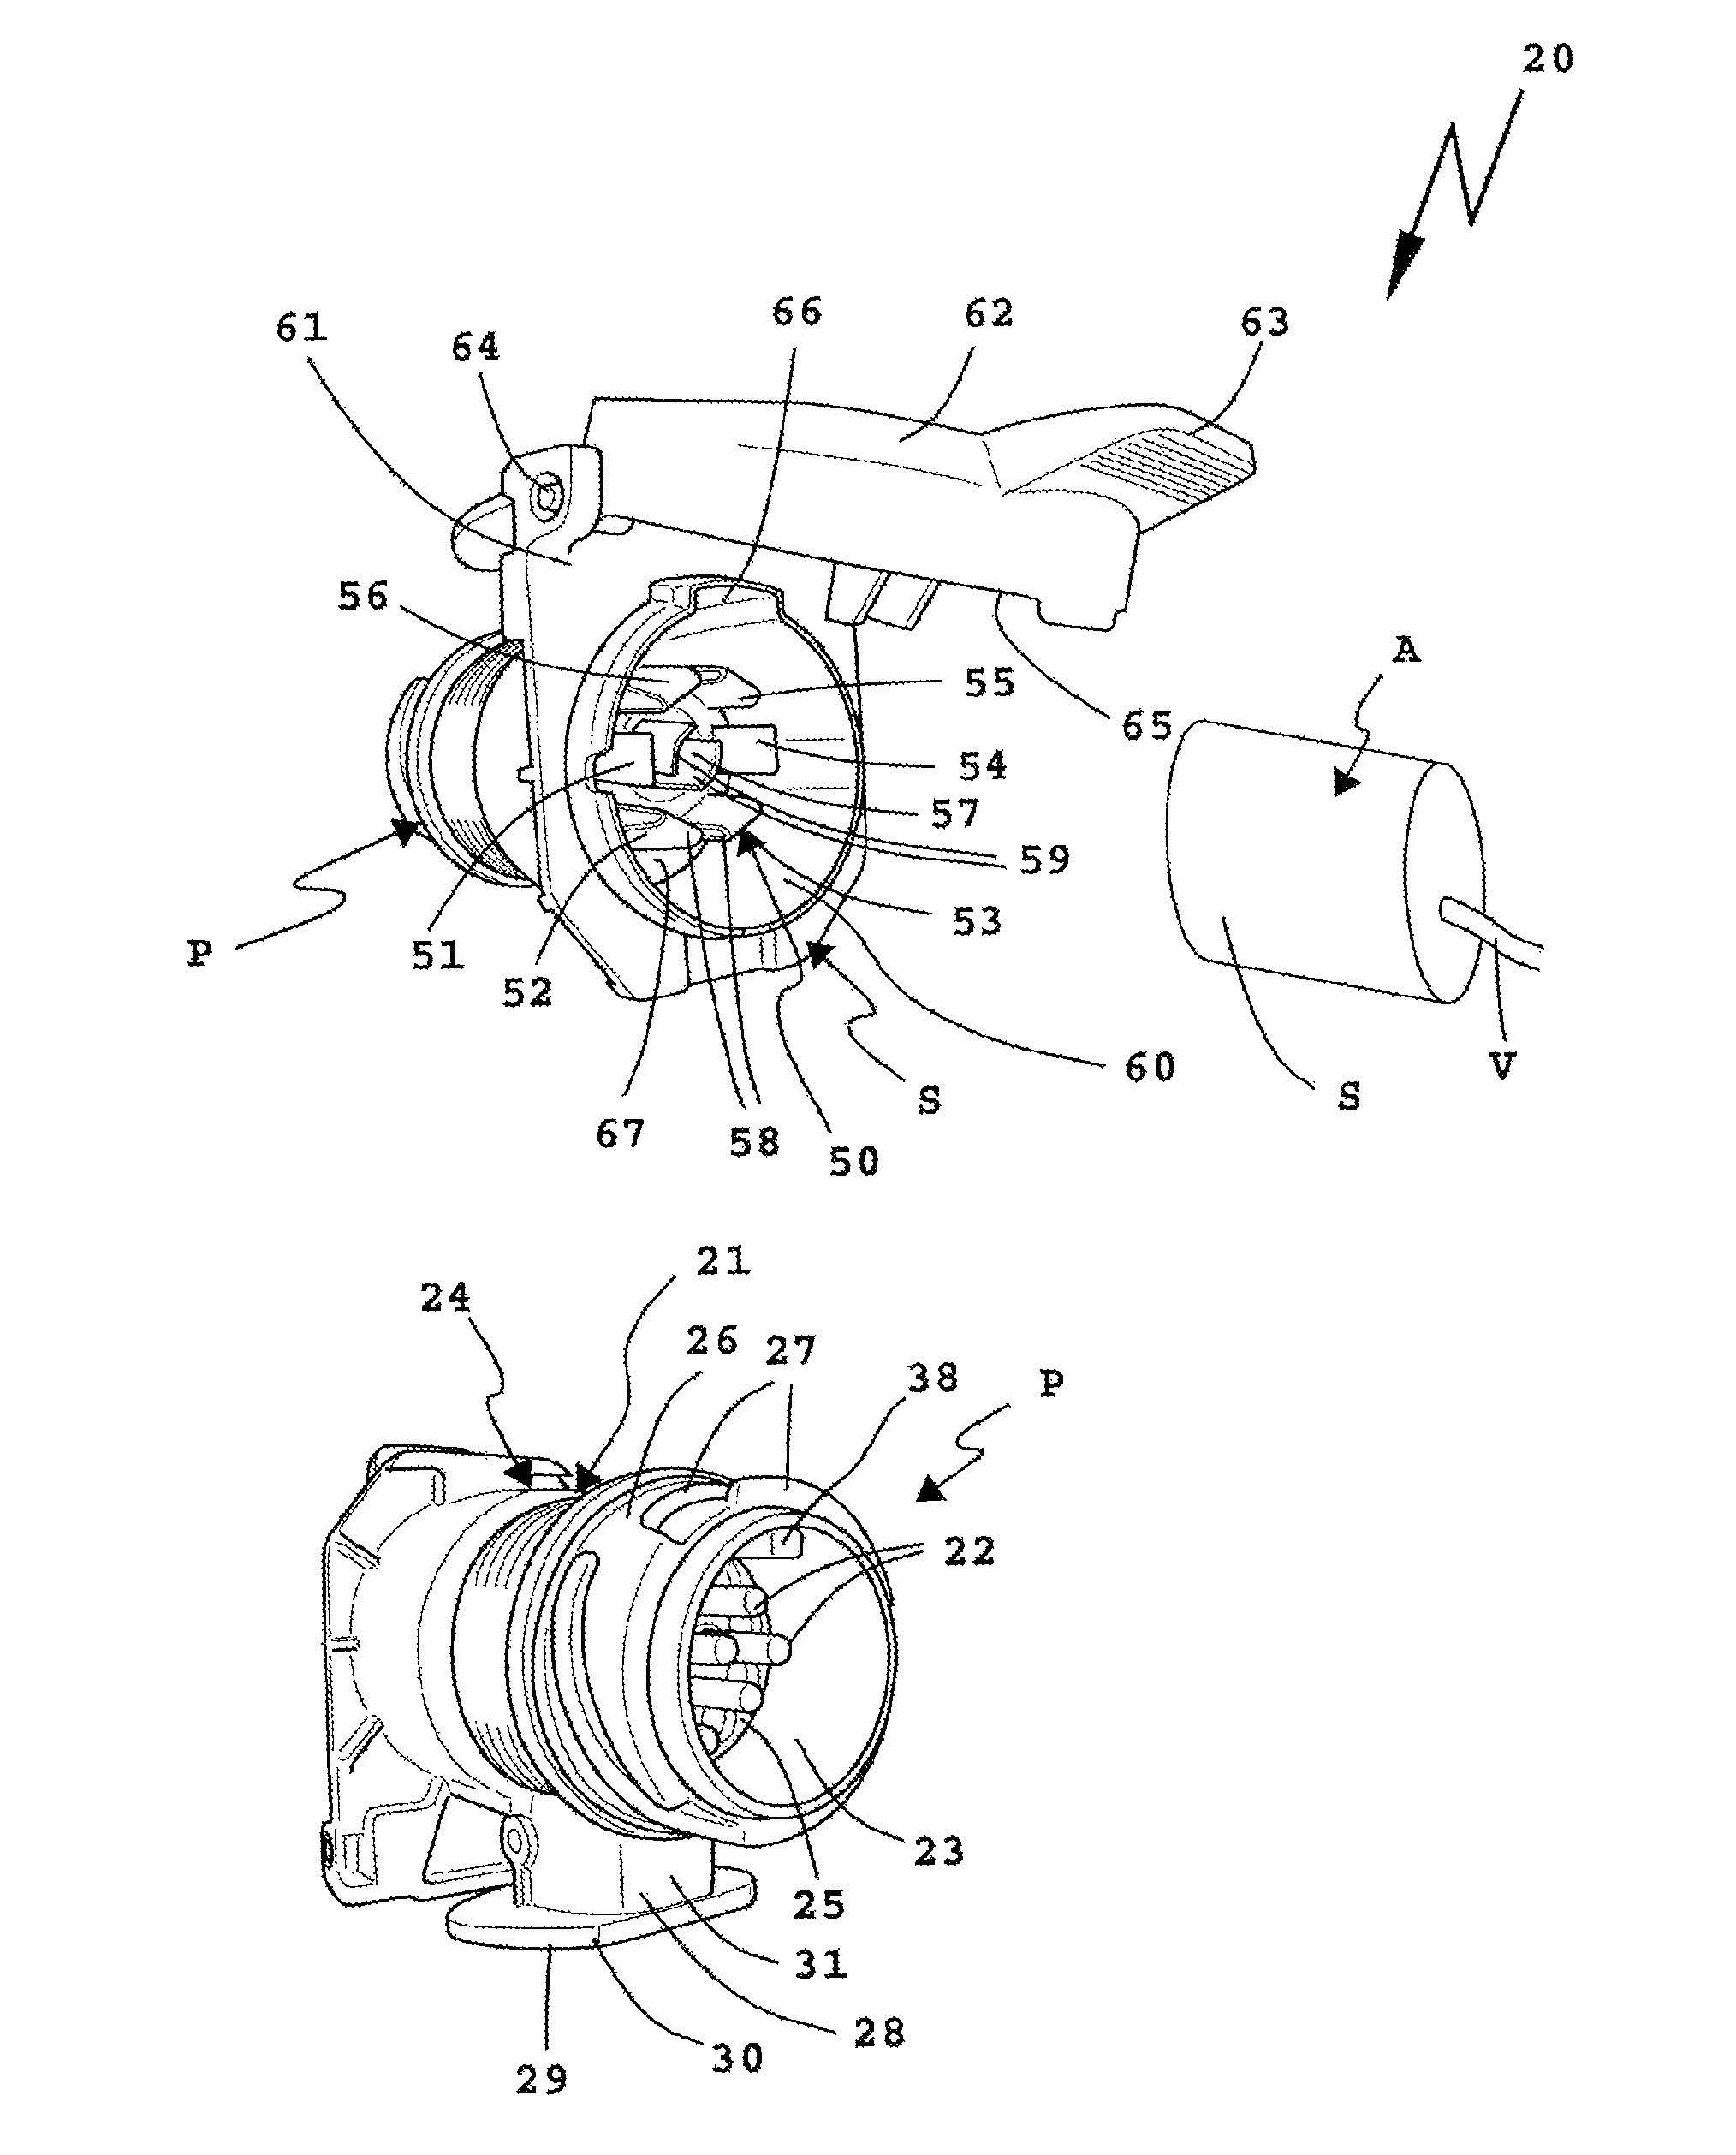 Adapter for a socket of a trailer coupling